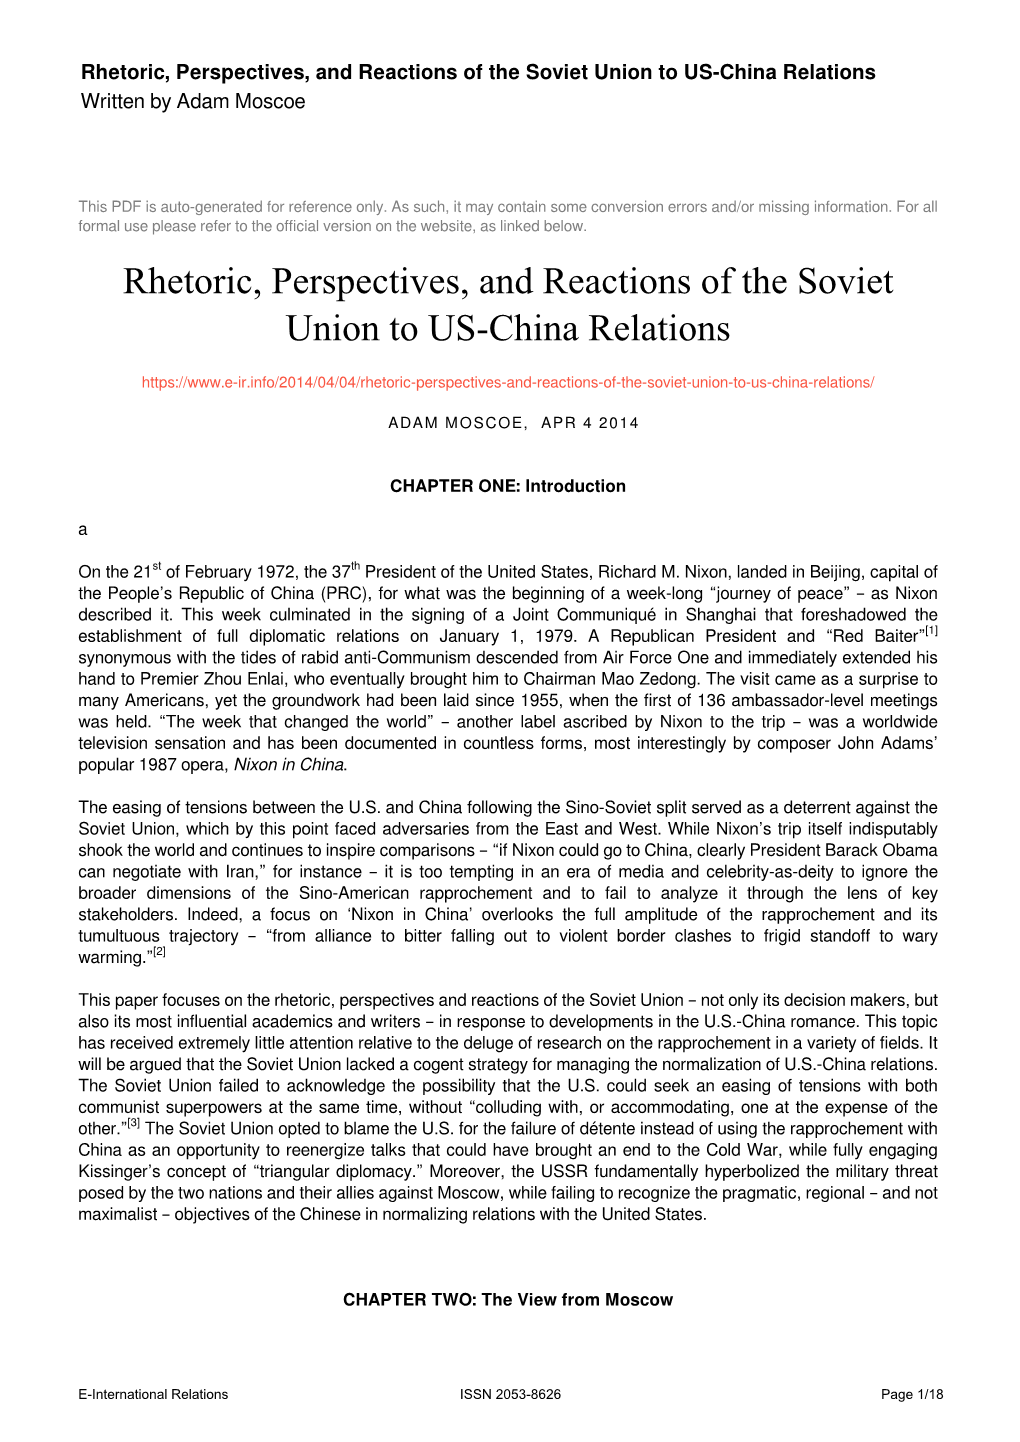 Rhetoric, Perspectives, and Reactions of the Soviet Union to US-China Relations Written by Adam Moscoe